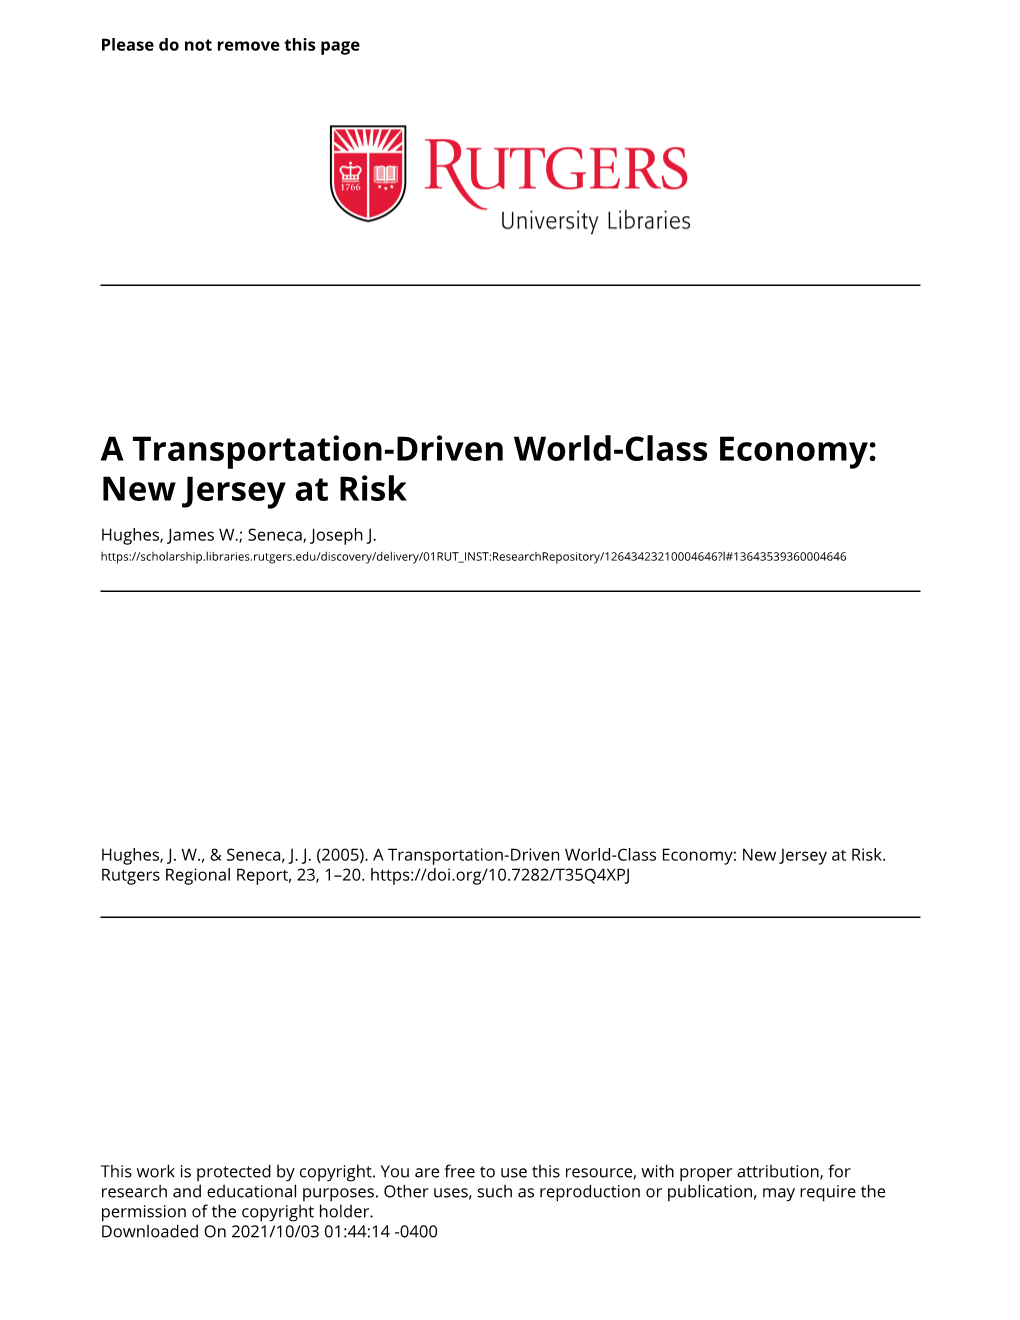 A Transportation-Driven World-Class Economy: New Jersey at Risk